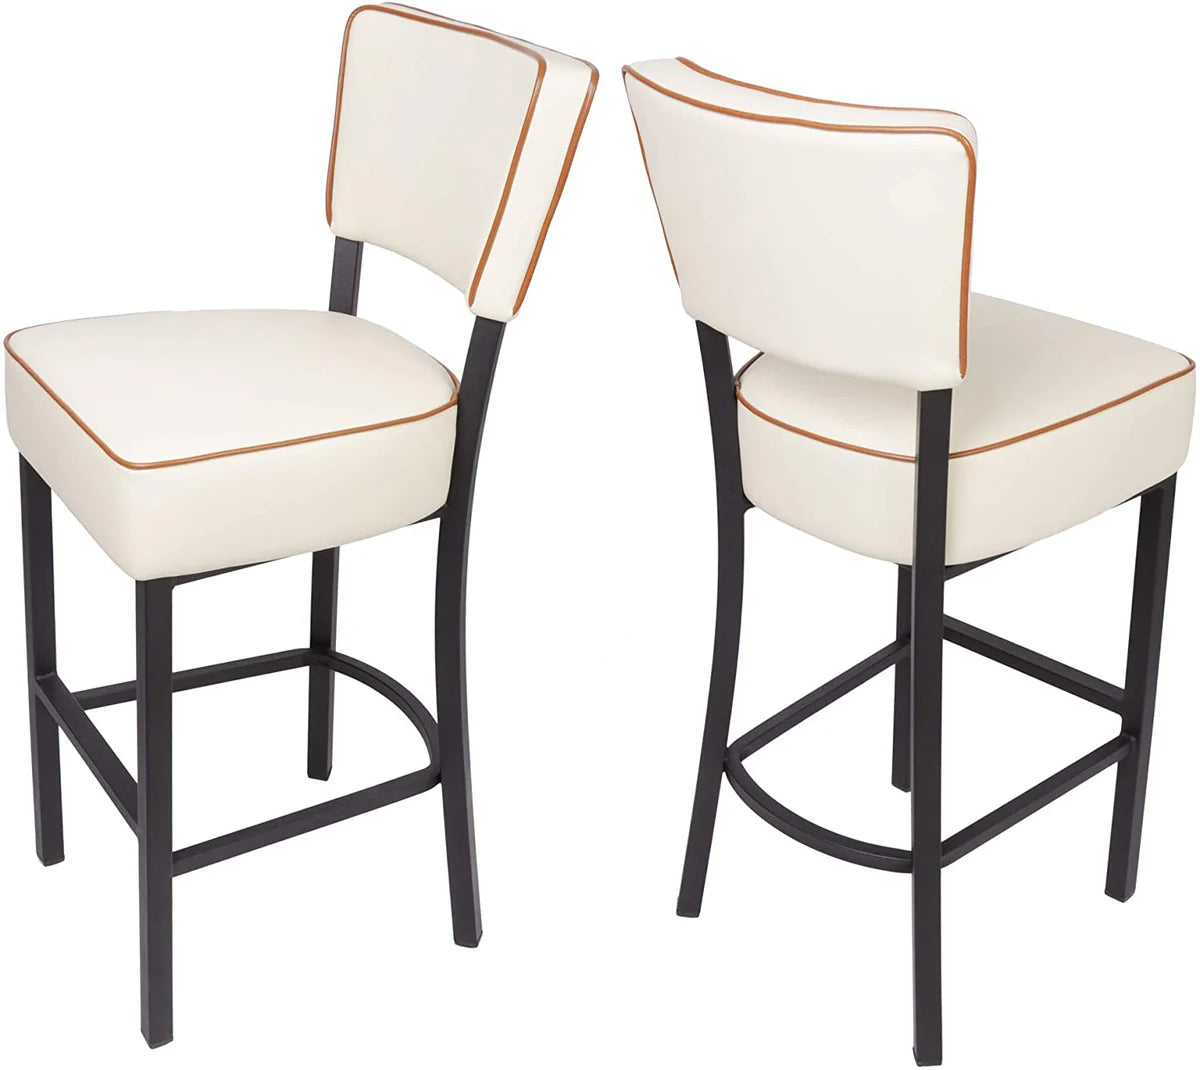 30" Upholstered Bar Stools Kitchen Chairs Counter Pub Leather Dining Chairs, Beige